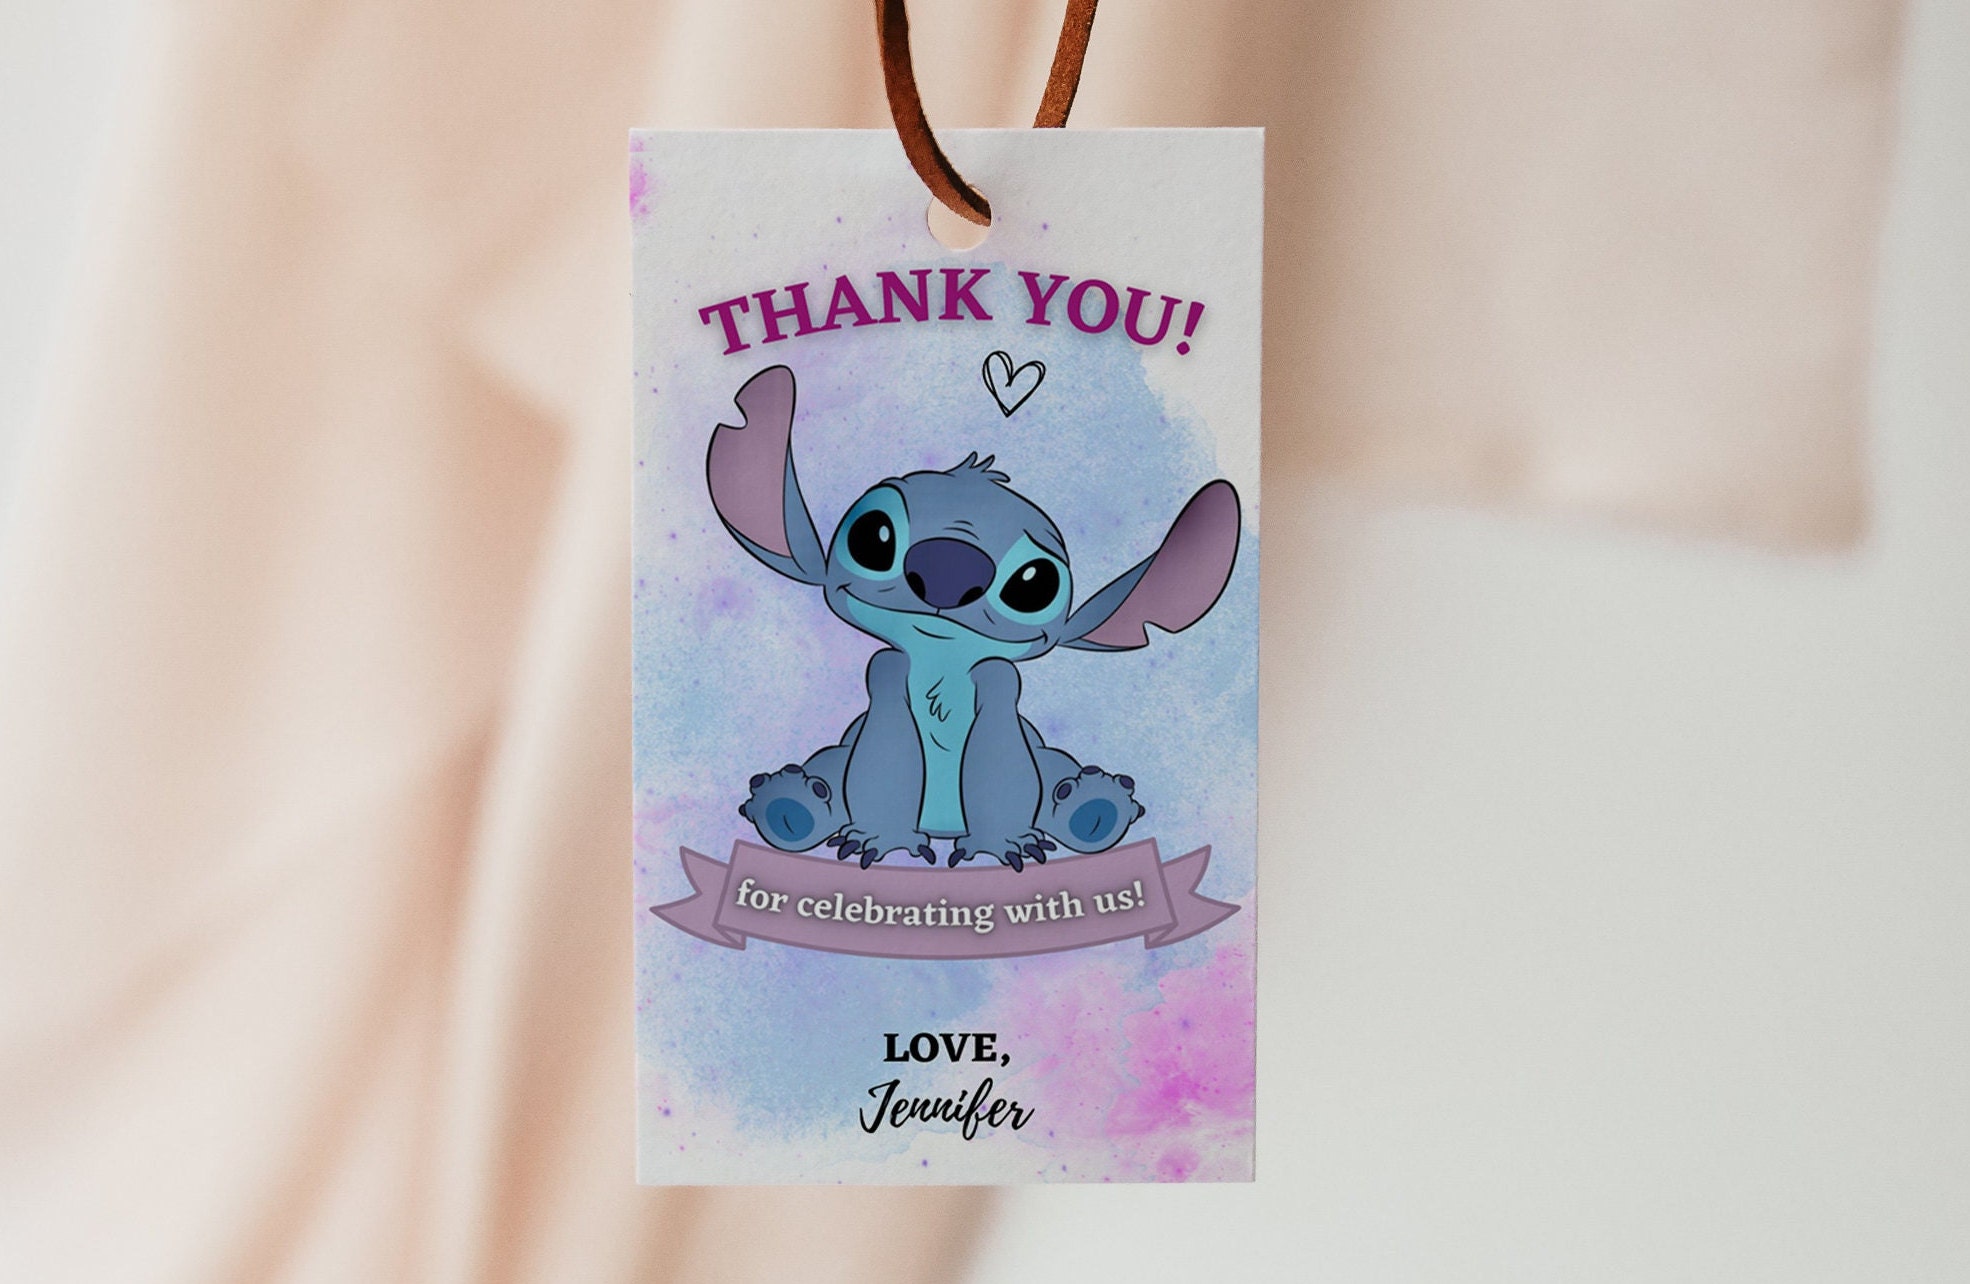 Lilo and Stitch Goodie Bags Lilo-stitch-party Bags -  Norway